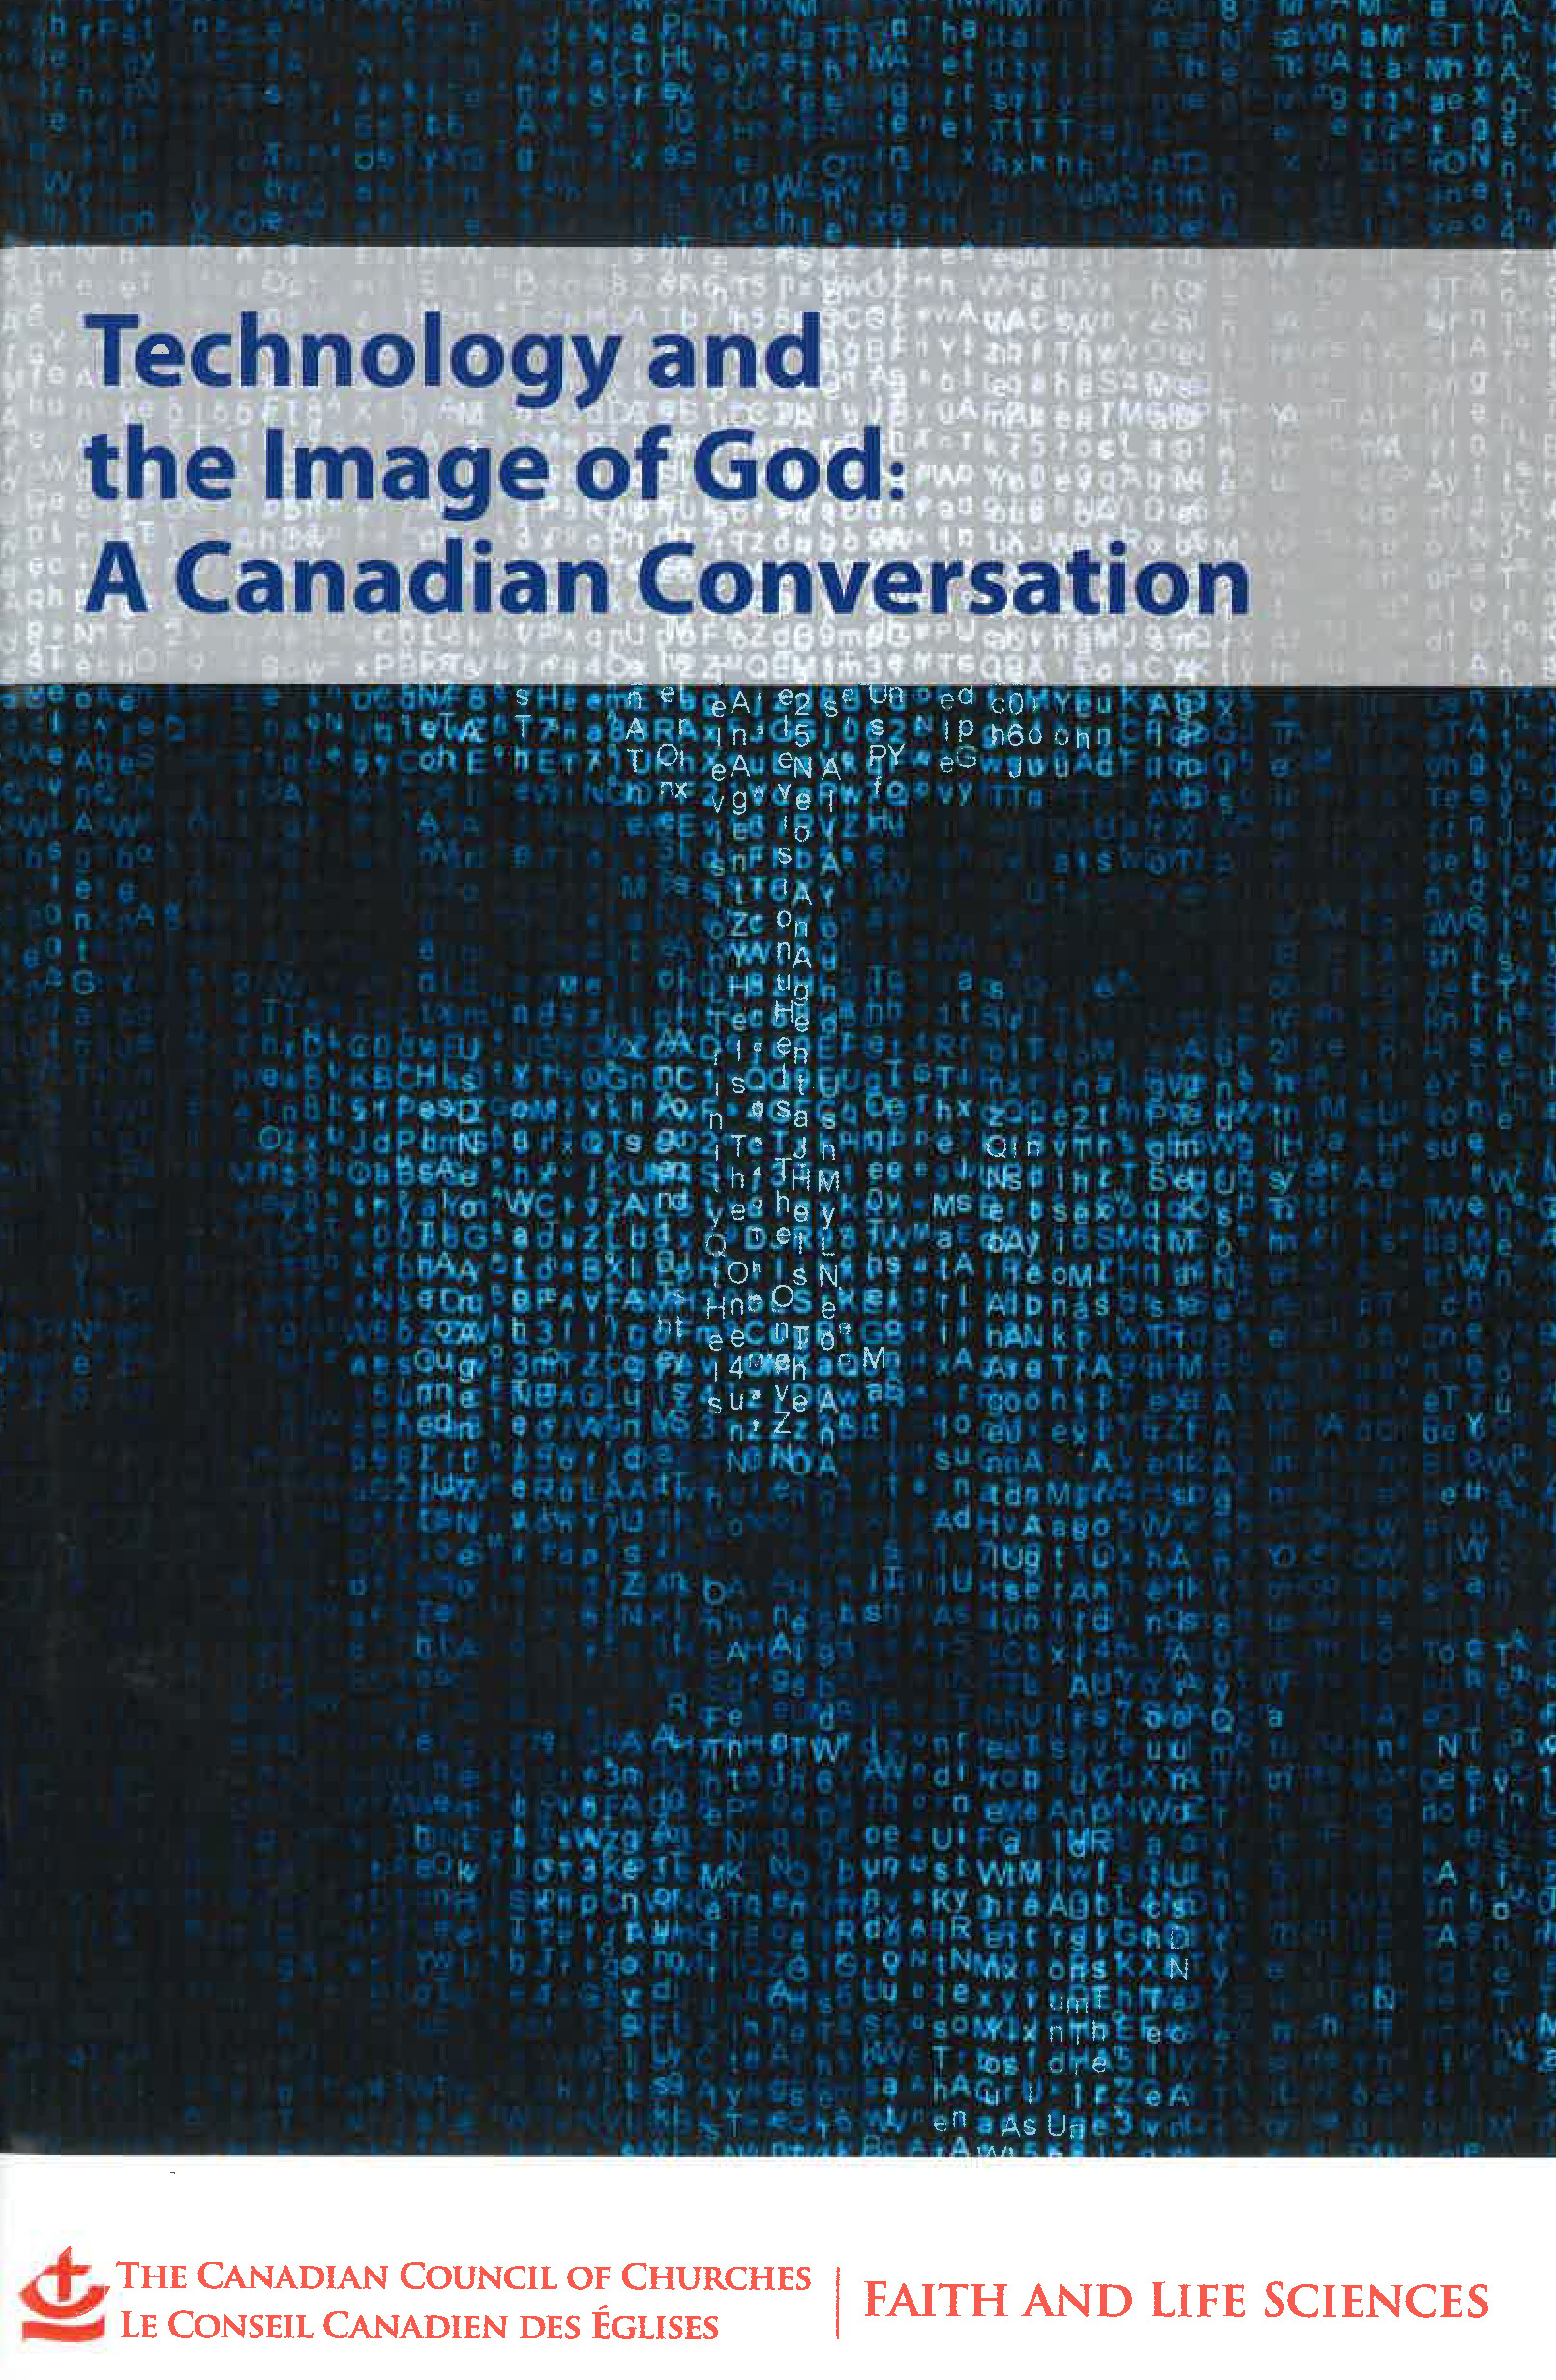 Book Cover: Technology and the Image of God: A Canadian Conversation